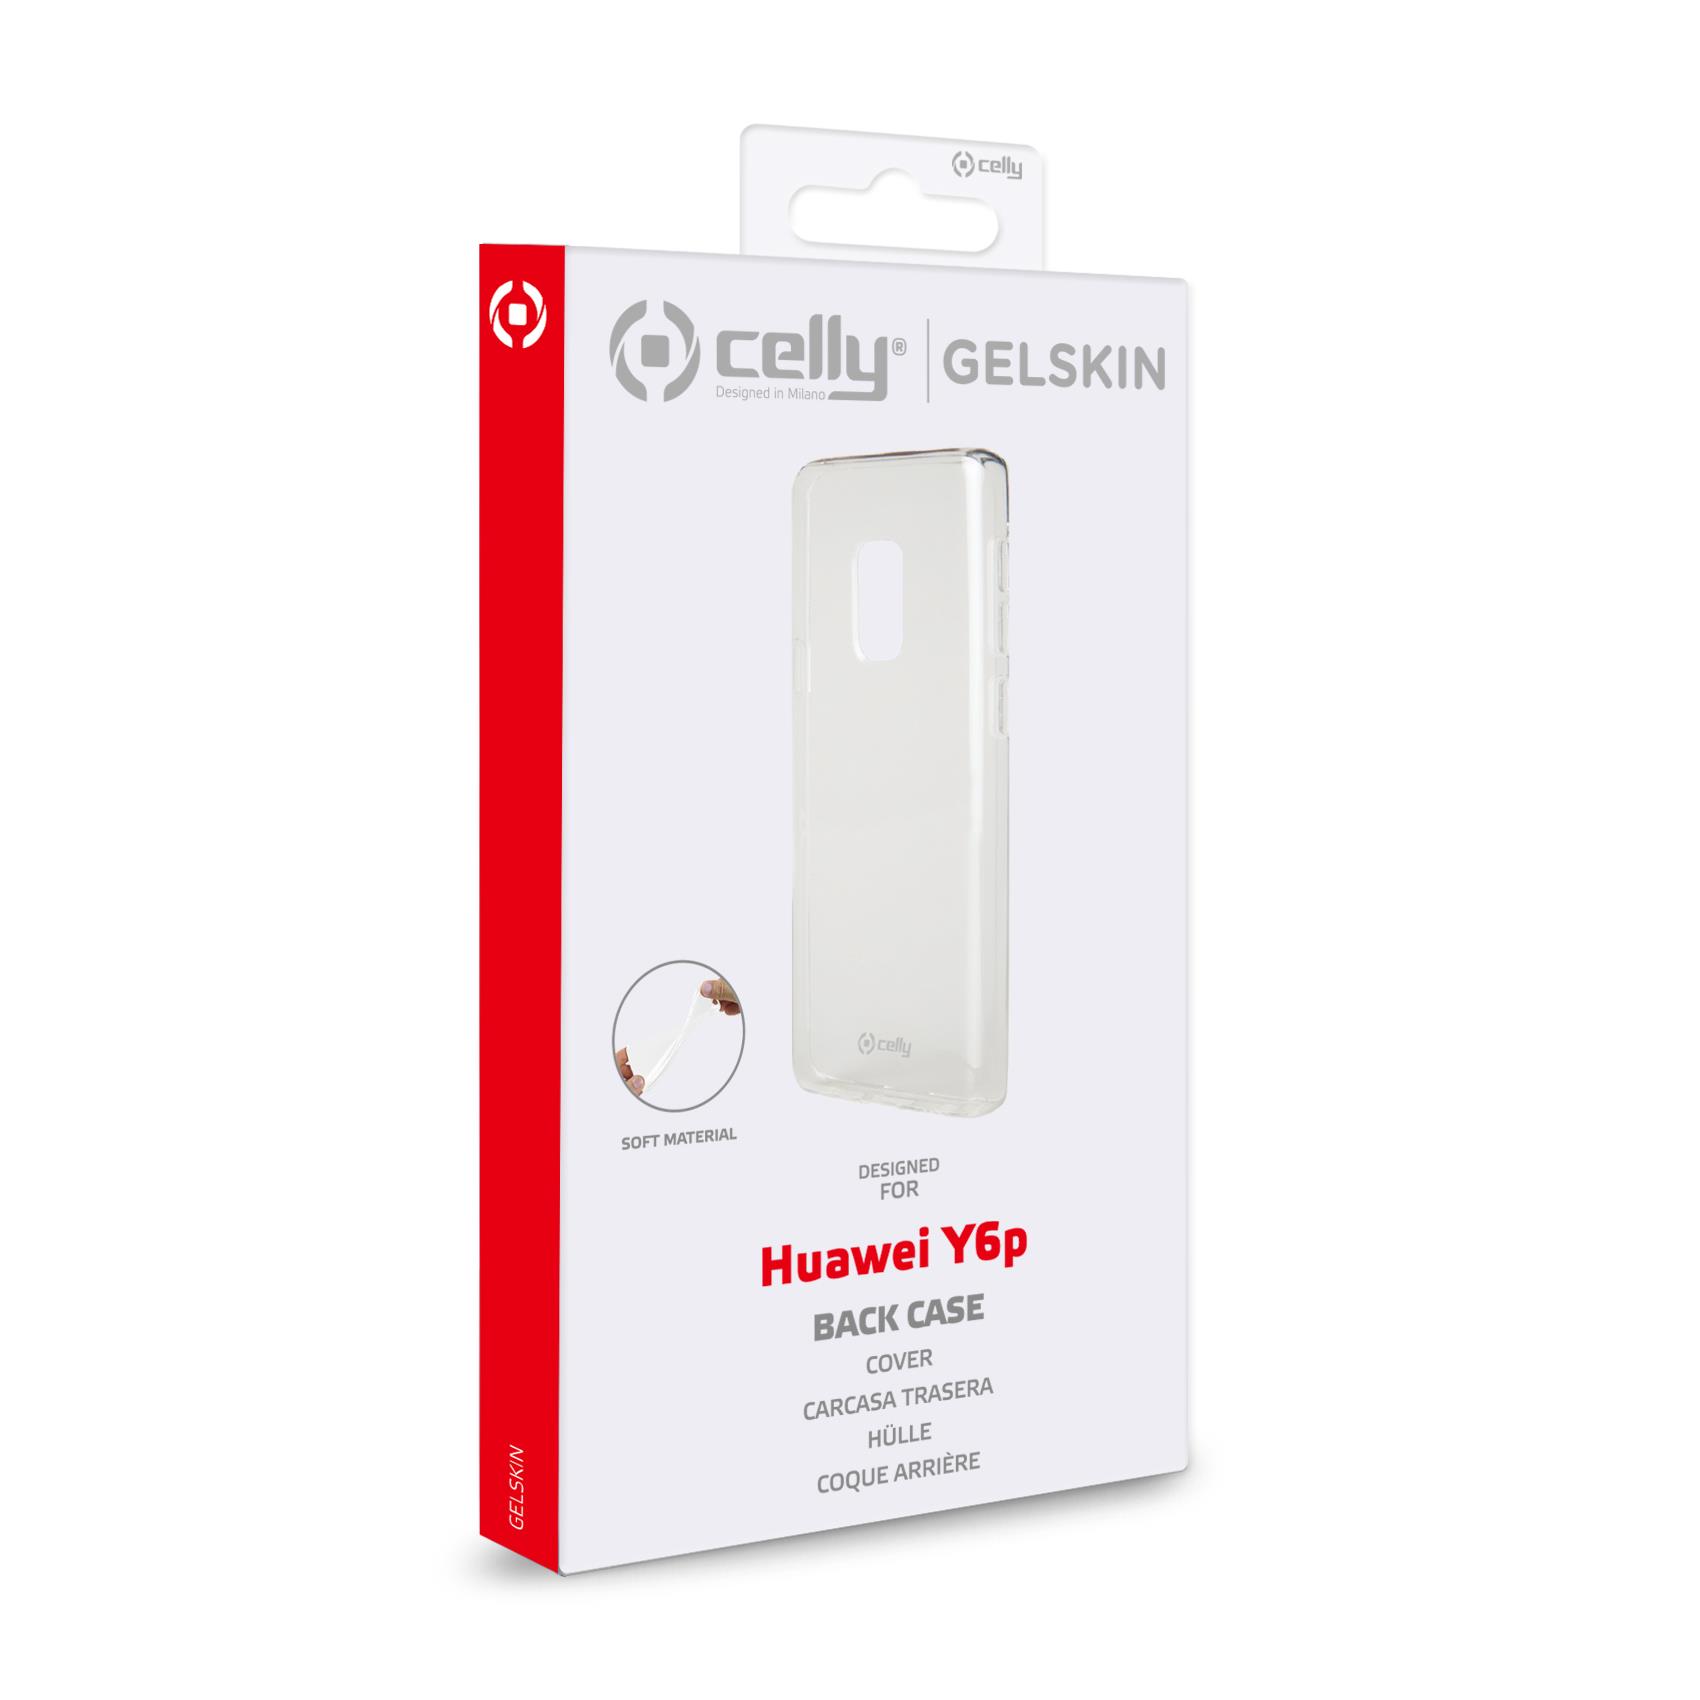 Tpu Cover Huawei Y6p Celly Gelskin926 8021735761099